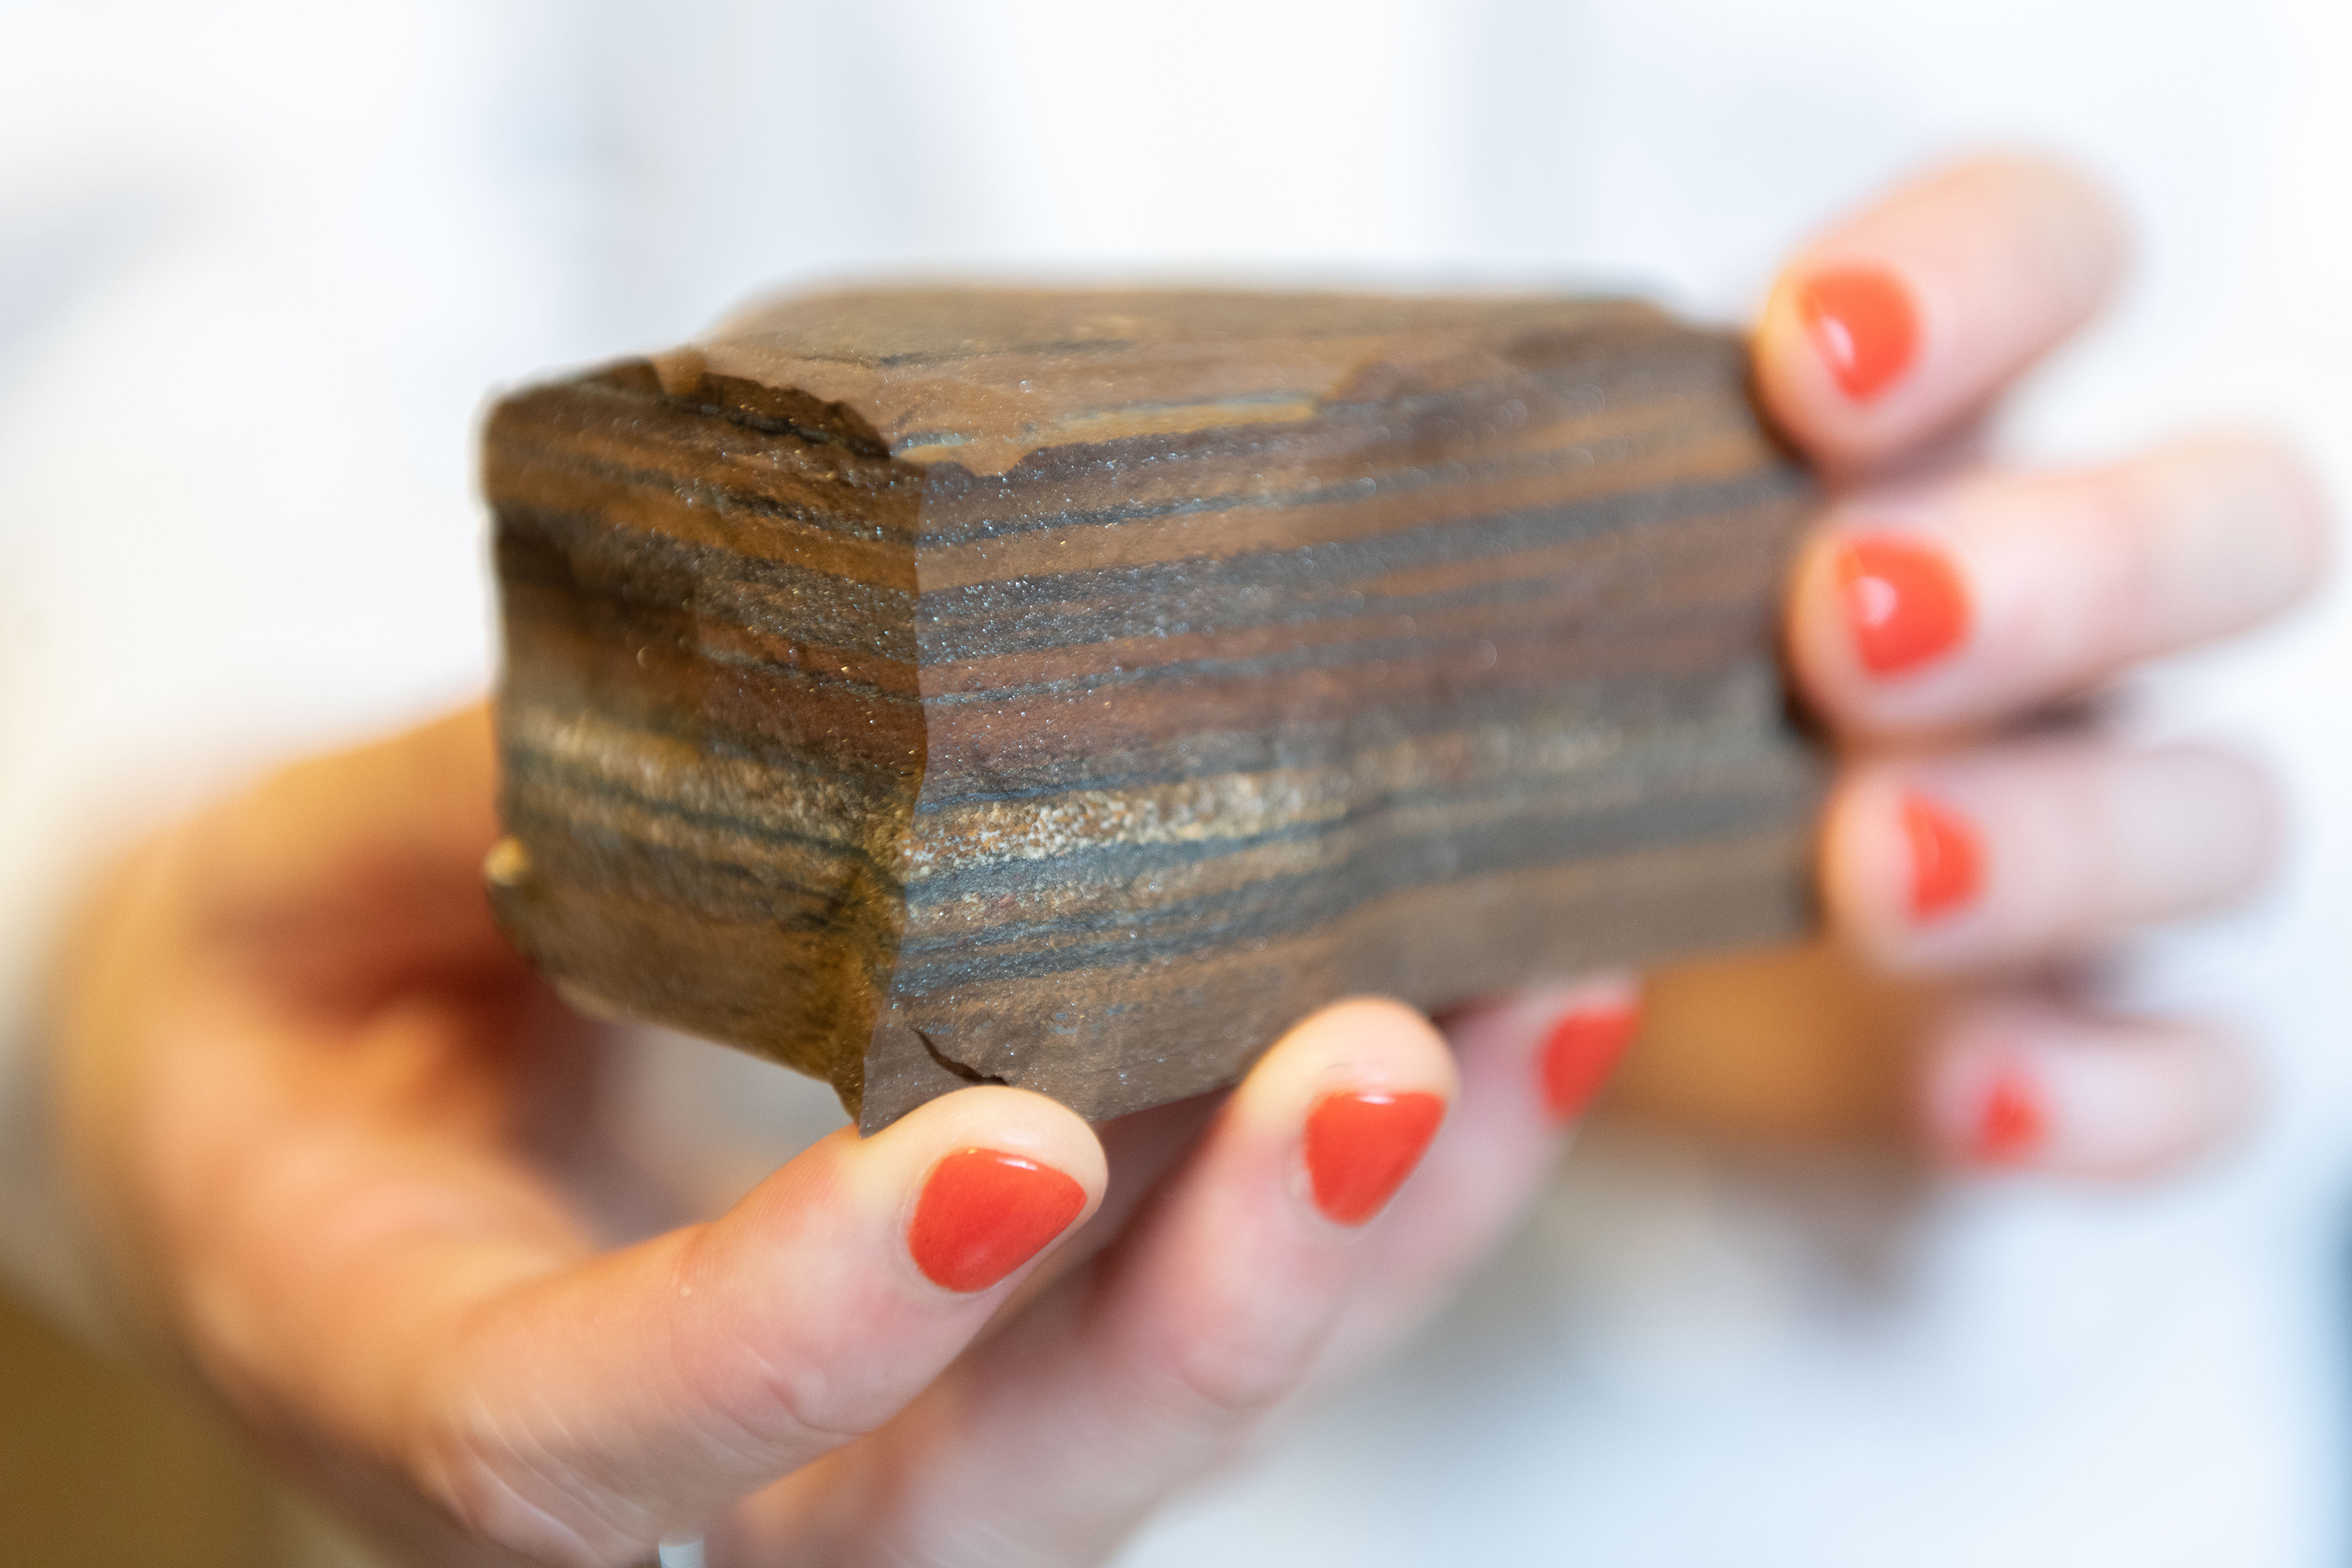 Ancient tiger eye BIF (banded iron formation) rock with varying layers that include iron that fell out of ancient oceans. An eon ago, oceans appear to have been full of ferrous iron, which would have facilitated production of N2O (laughing gas). Credit: Georgia Tech / Allison Carter